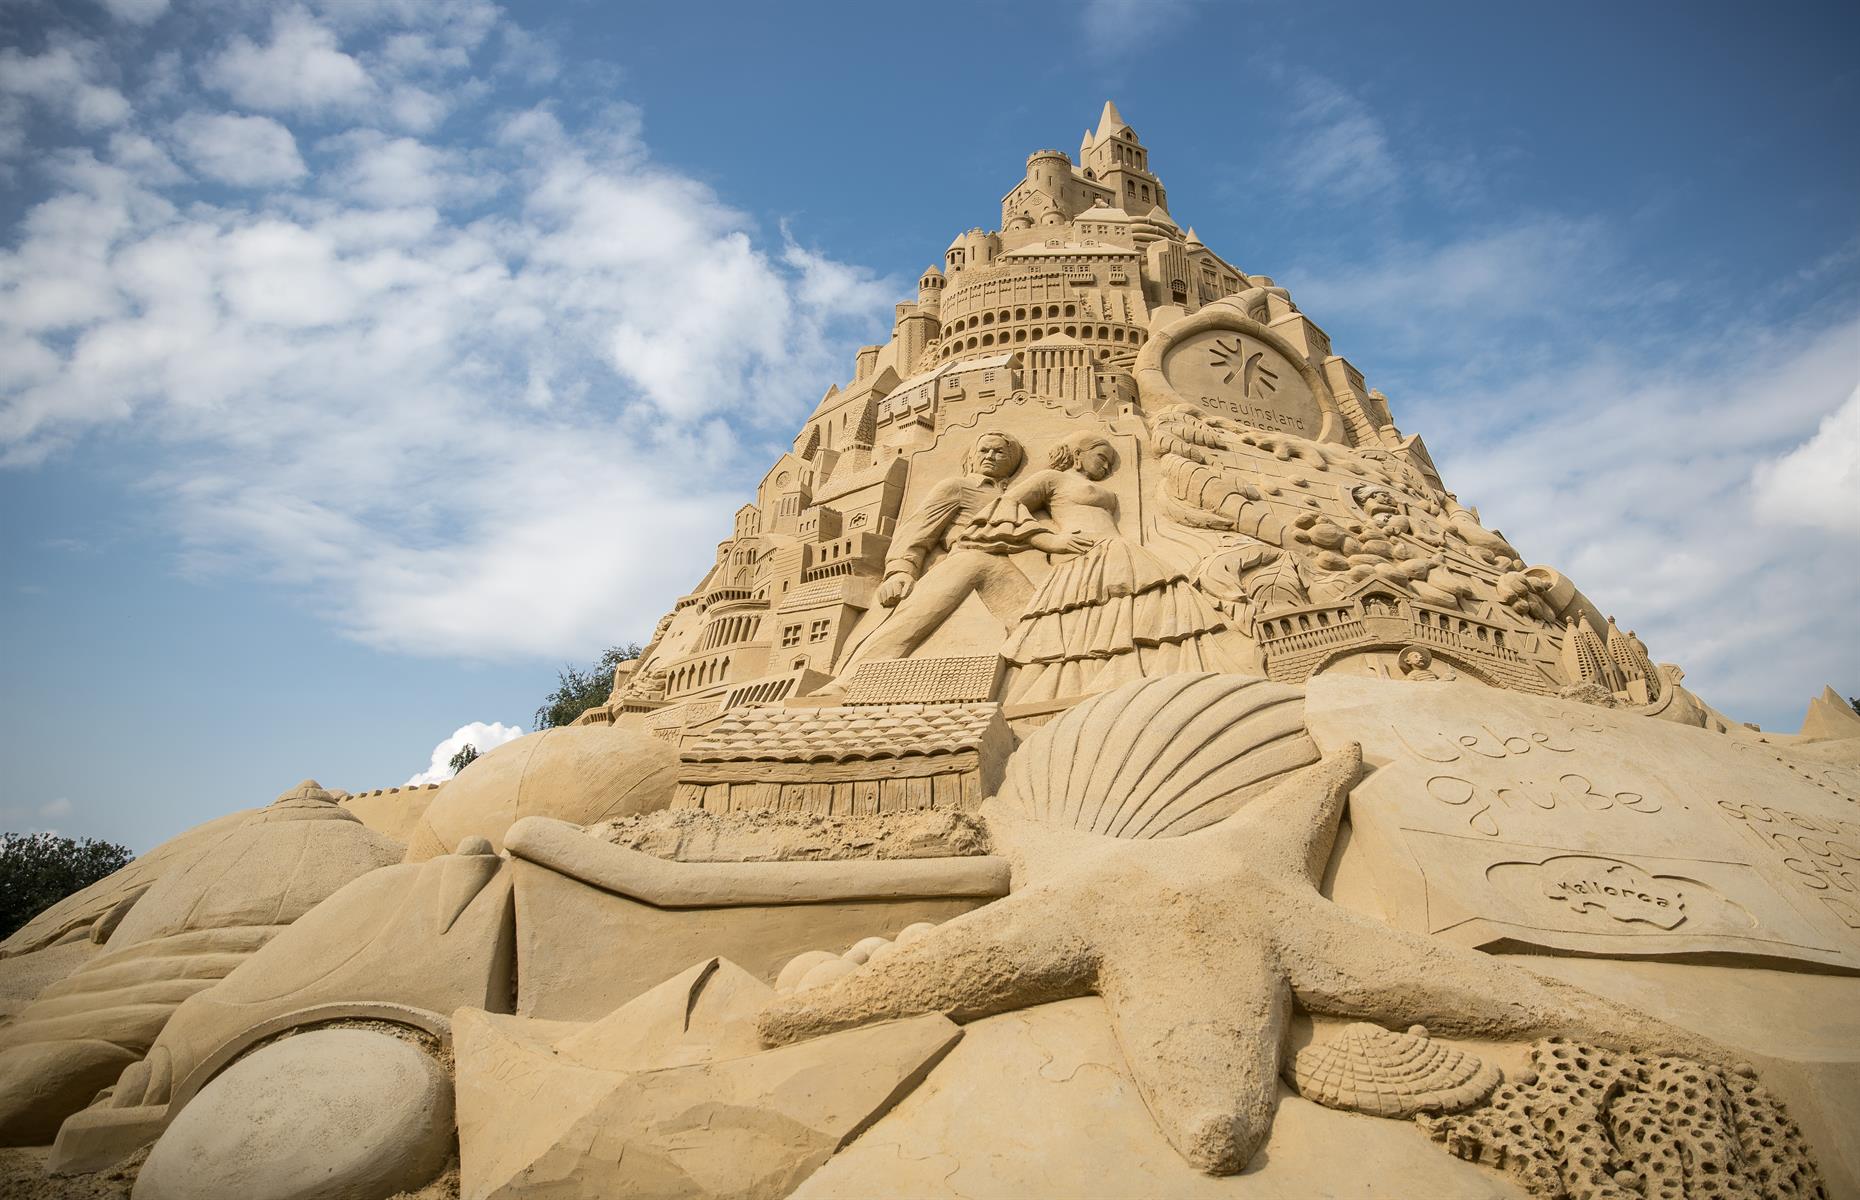 <p>Most years, serious sandcastle builders battle it out to create the tallest sandcastle in the world and make it into the <em>Guinness Book of World Records</em>. This mighty monument was constructed in Duisburg, in Germany's Rhineland region in 2017 and beat the previous world record by six feet (1.84m). The soaring Sandburg, which was commissioned by a local travel agency, took 19 artists three weeks to build and was made from 3,500 tons of sand. It was 55 feet (17m) high.</p>